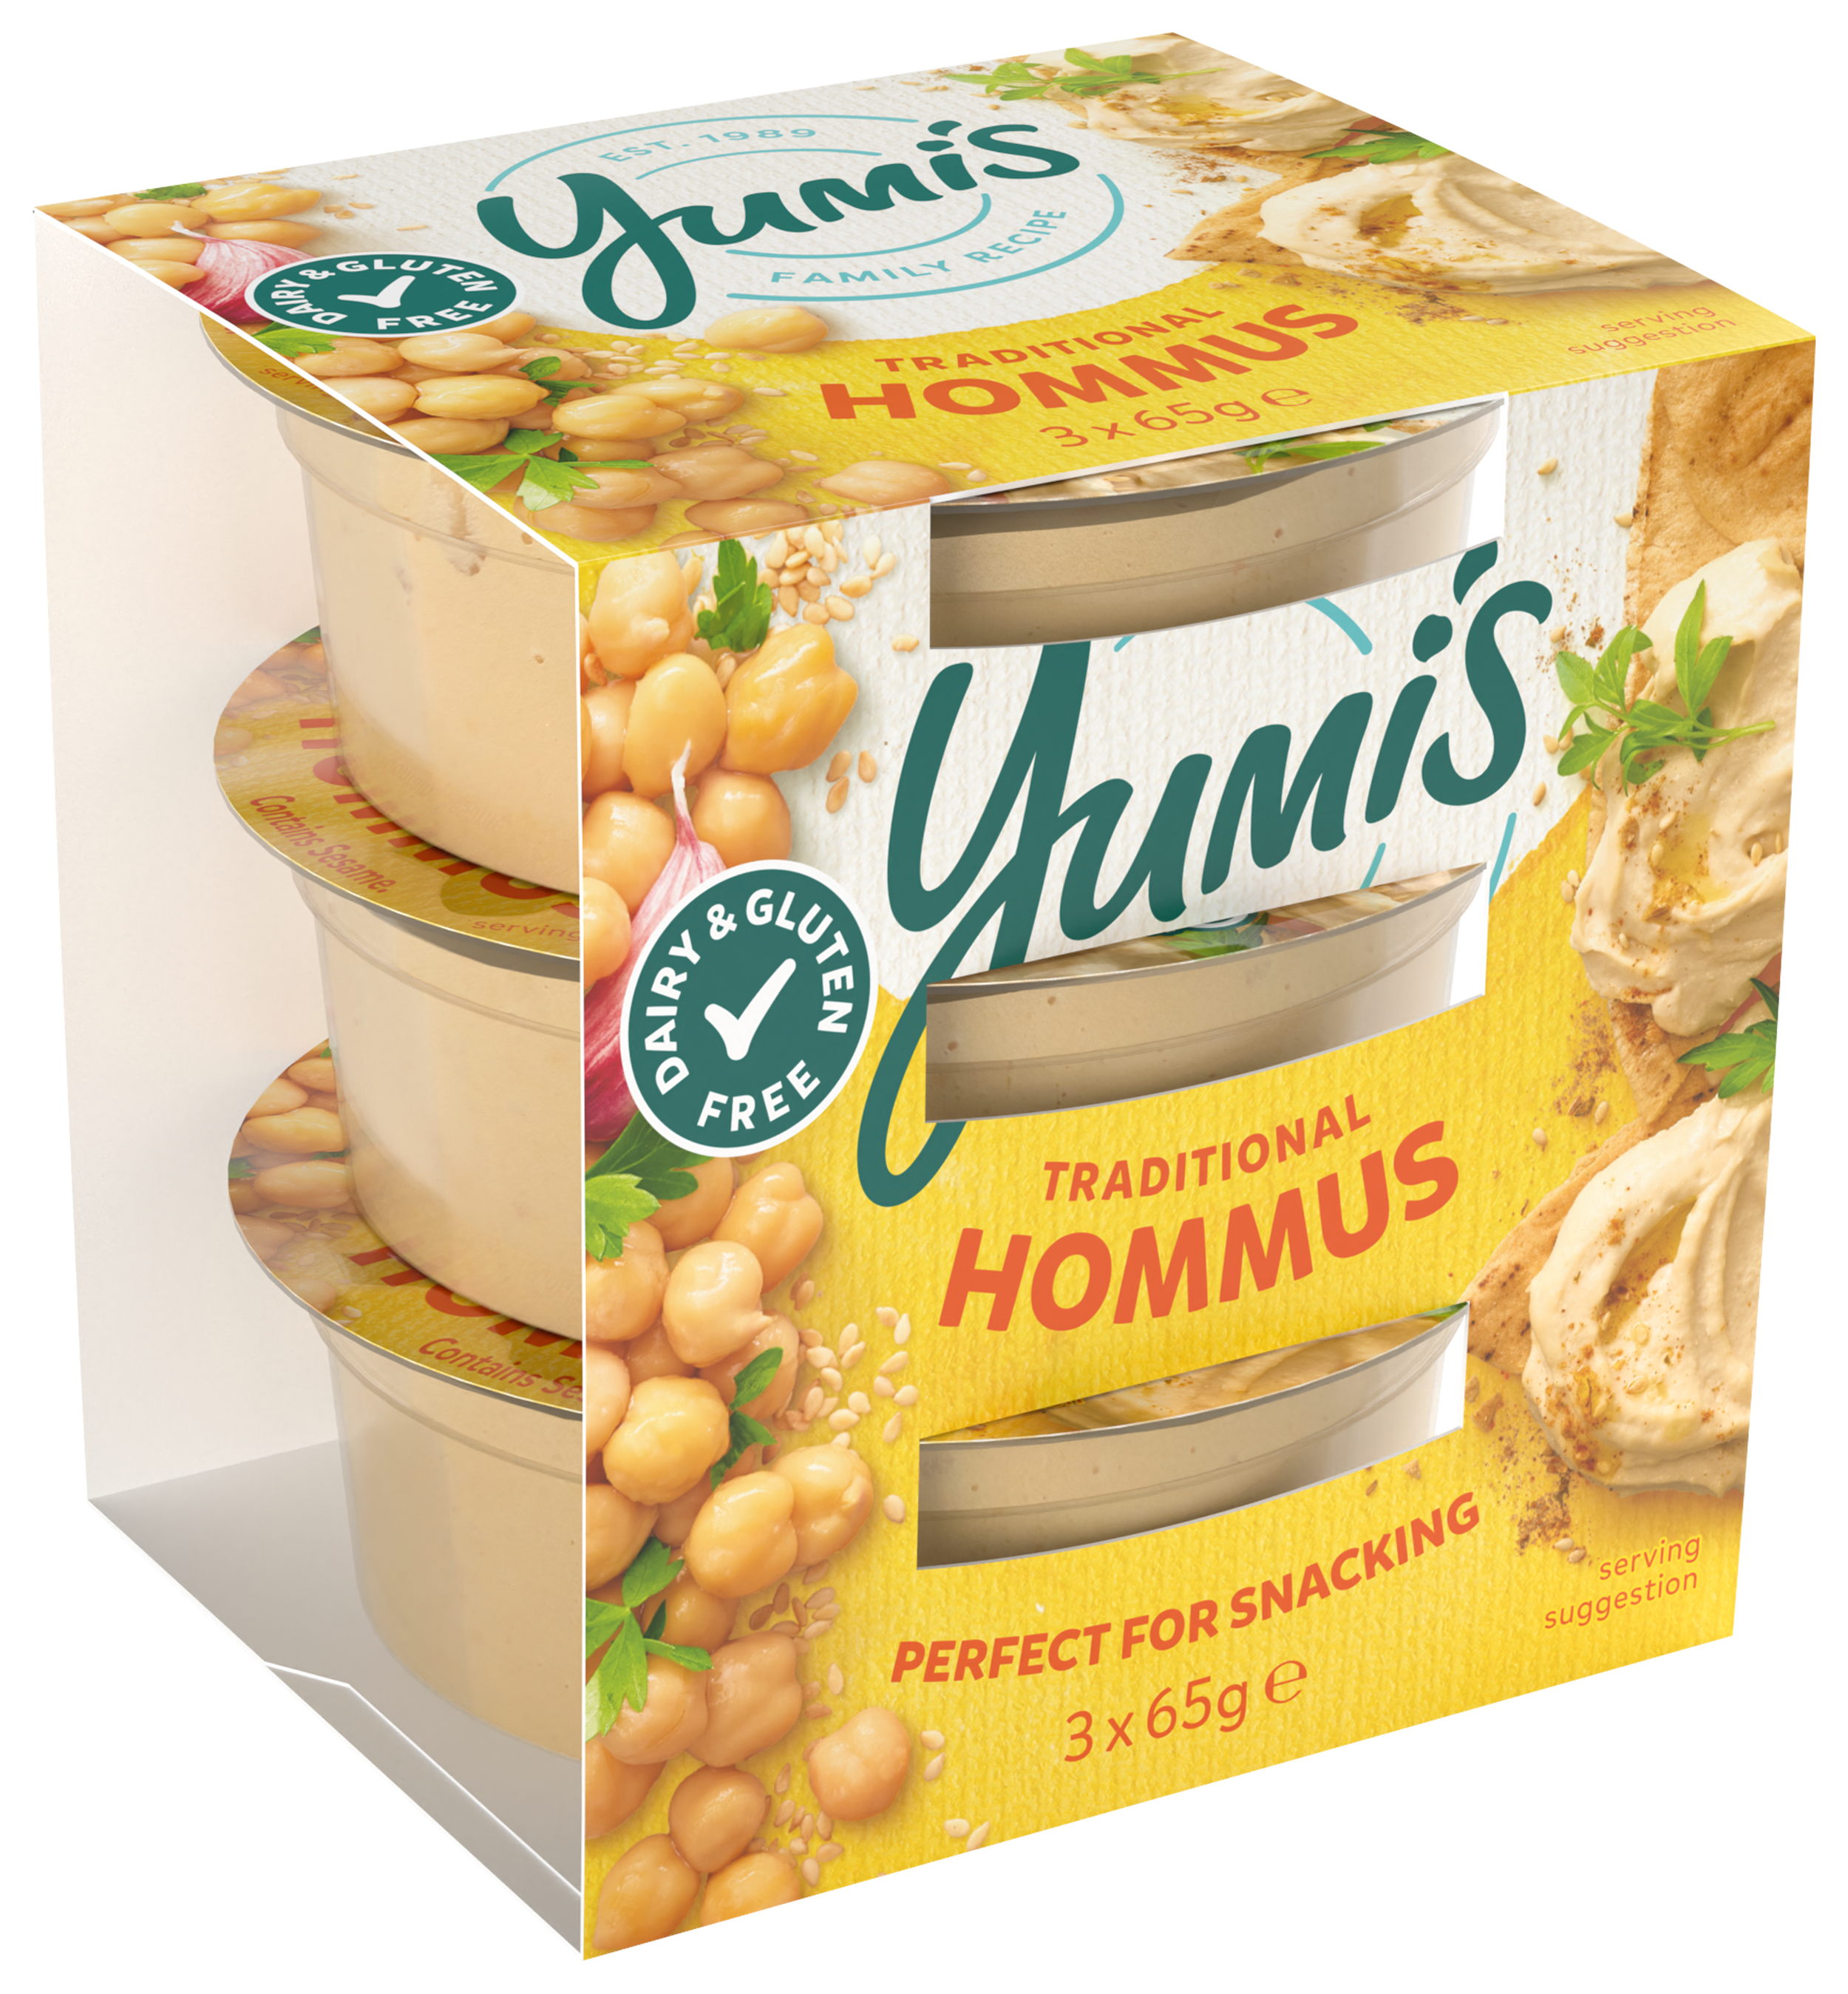 yumis-3x65g-angle-side-traditional-hommus-hr.png